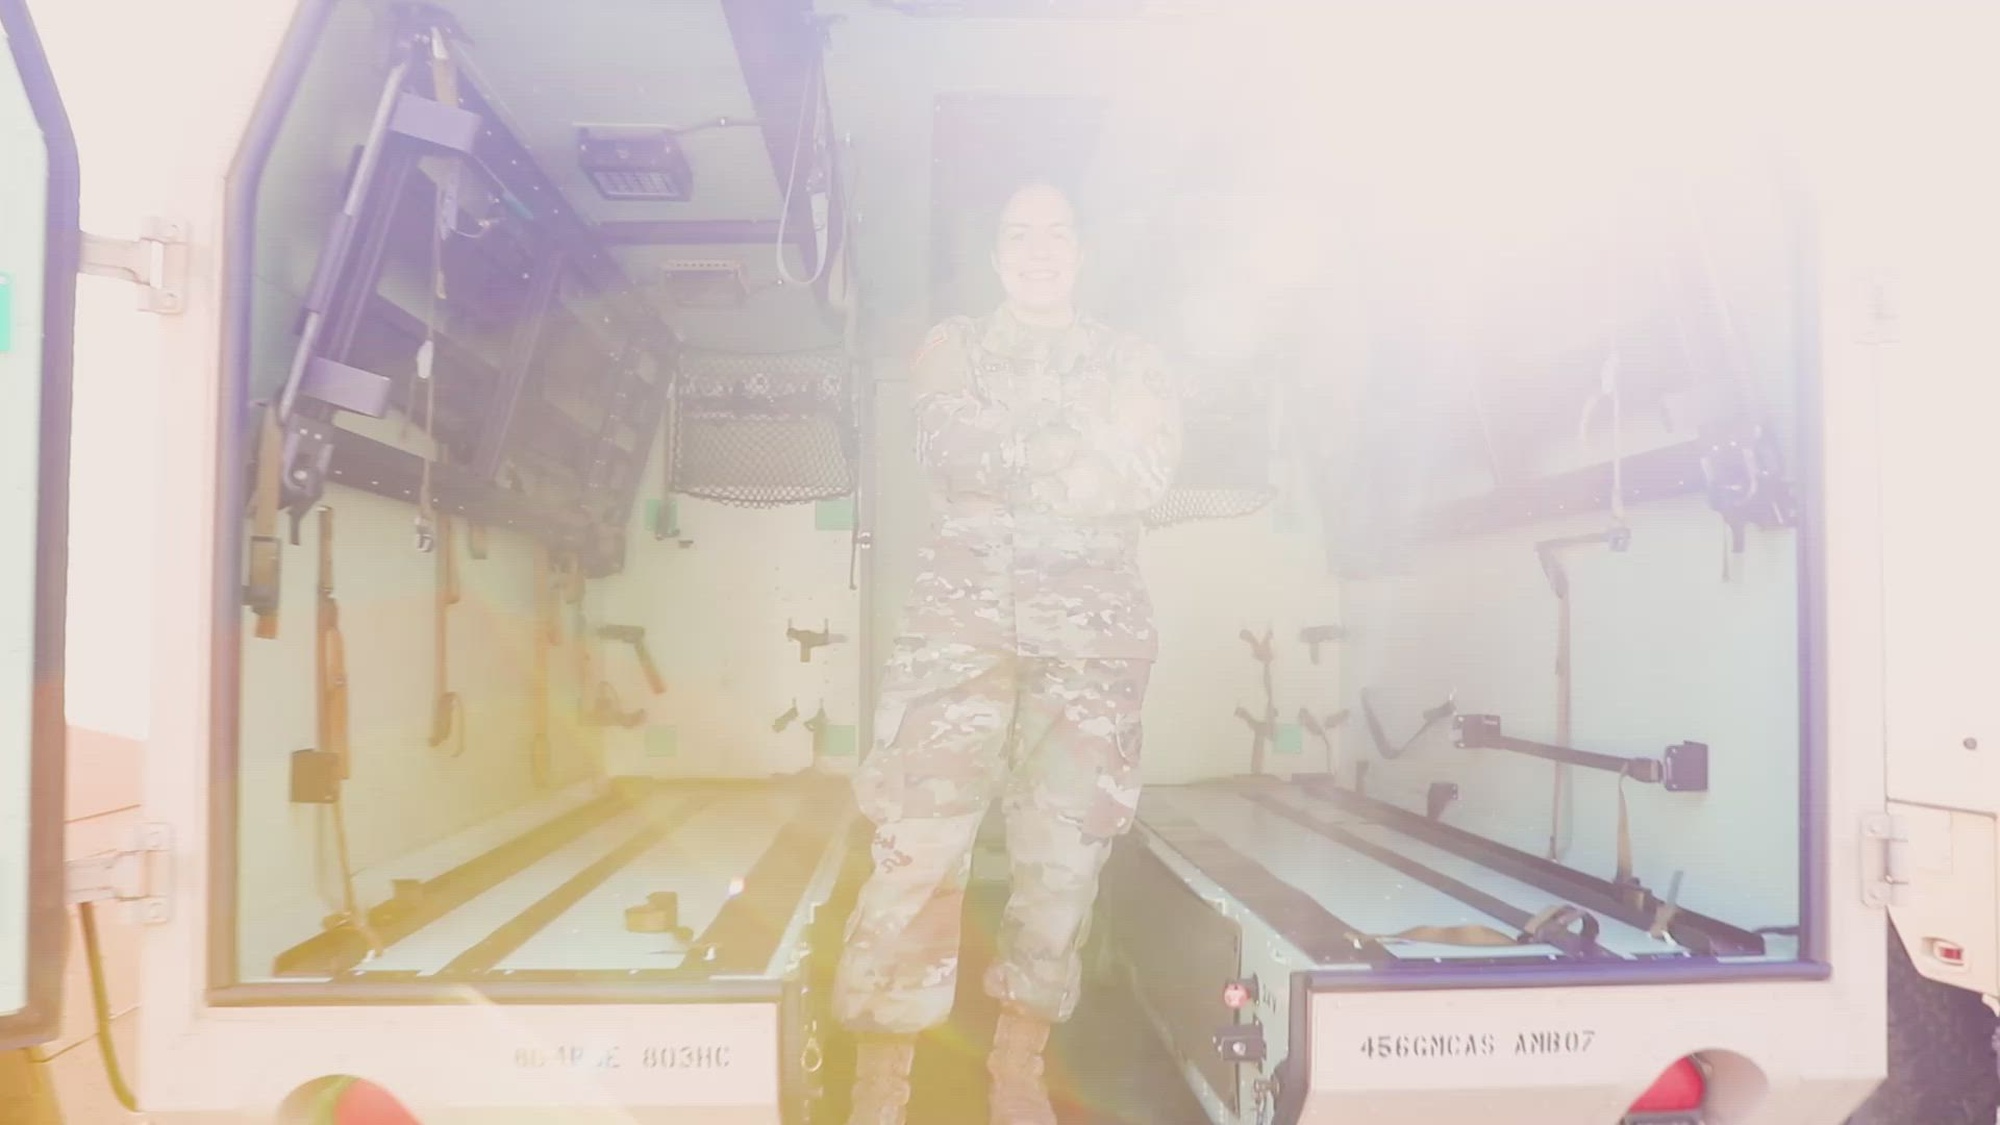 SPC Sarah Cloutier 456th Med Co. Practicing gaining IV access and obtaining vital signs.
Video captured by MAJ Jeffrey Gruidl